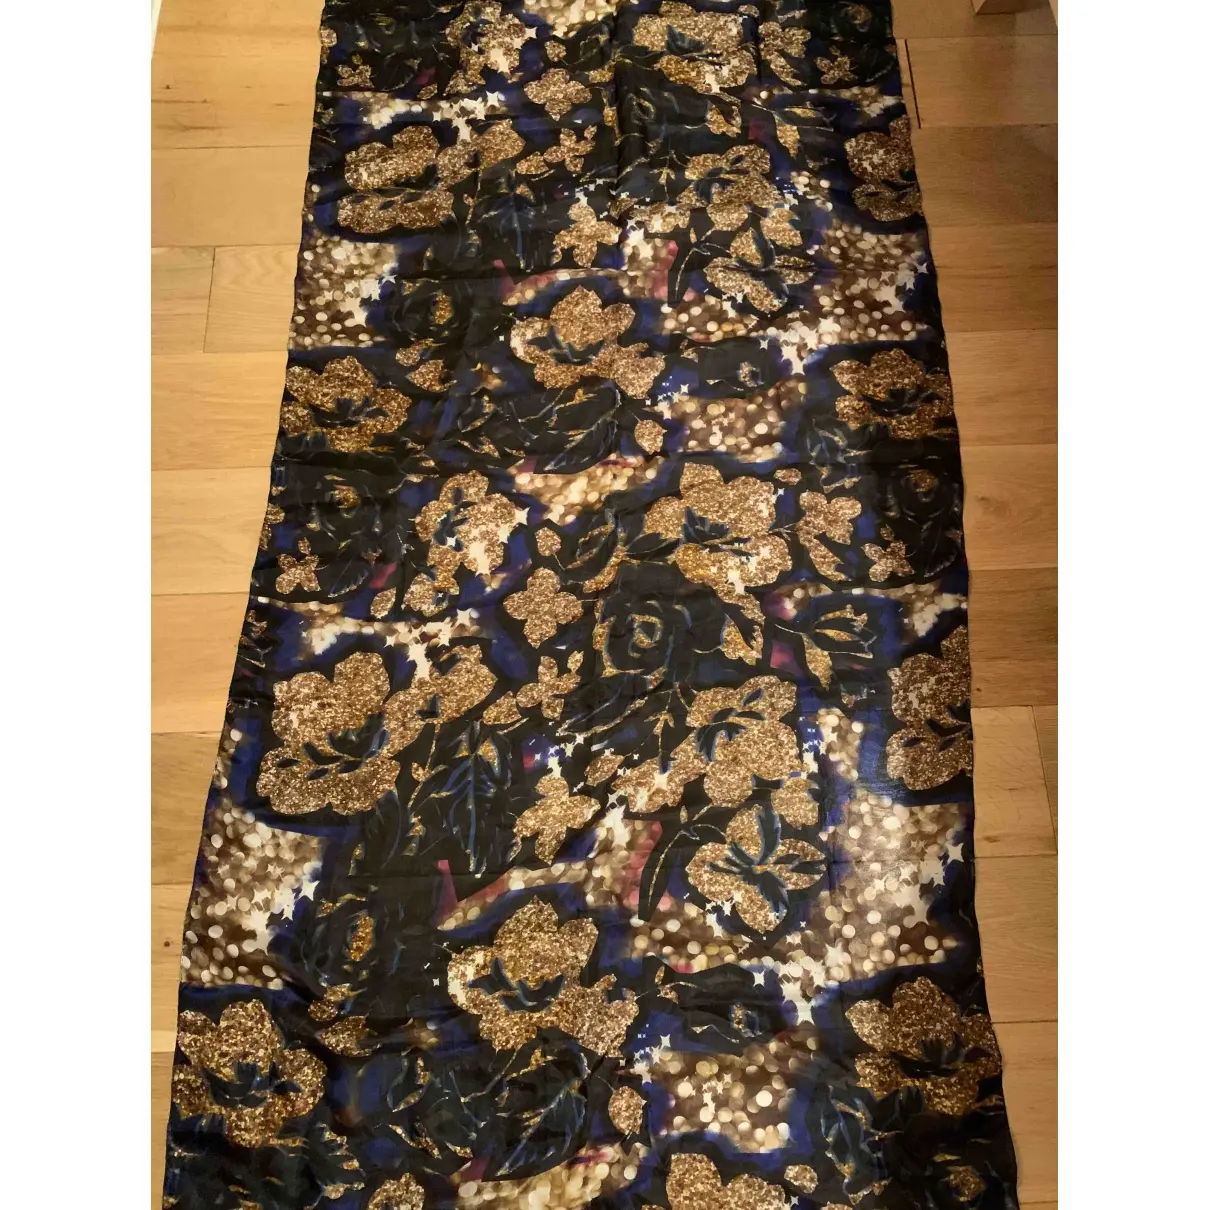 Mulberry Silk scarf for sale